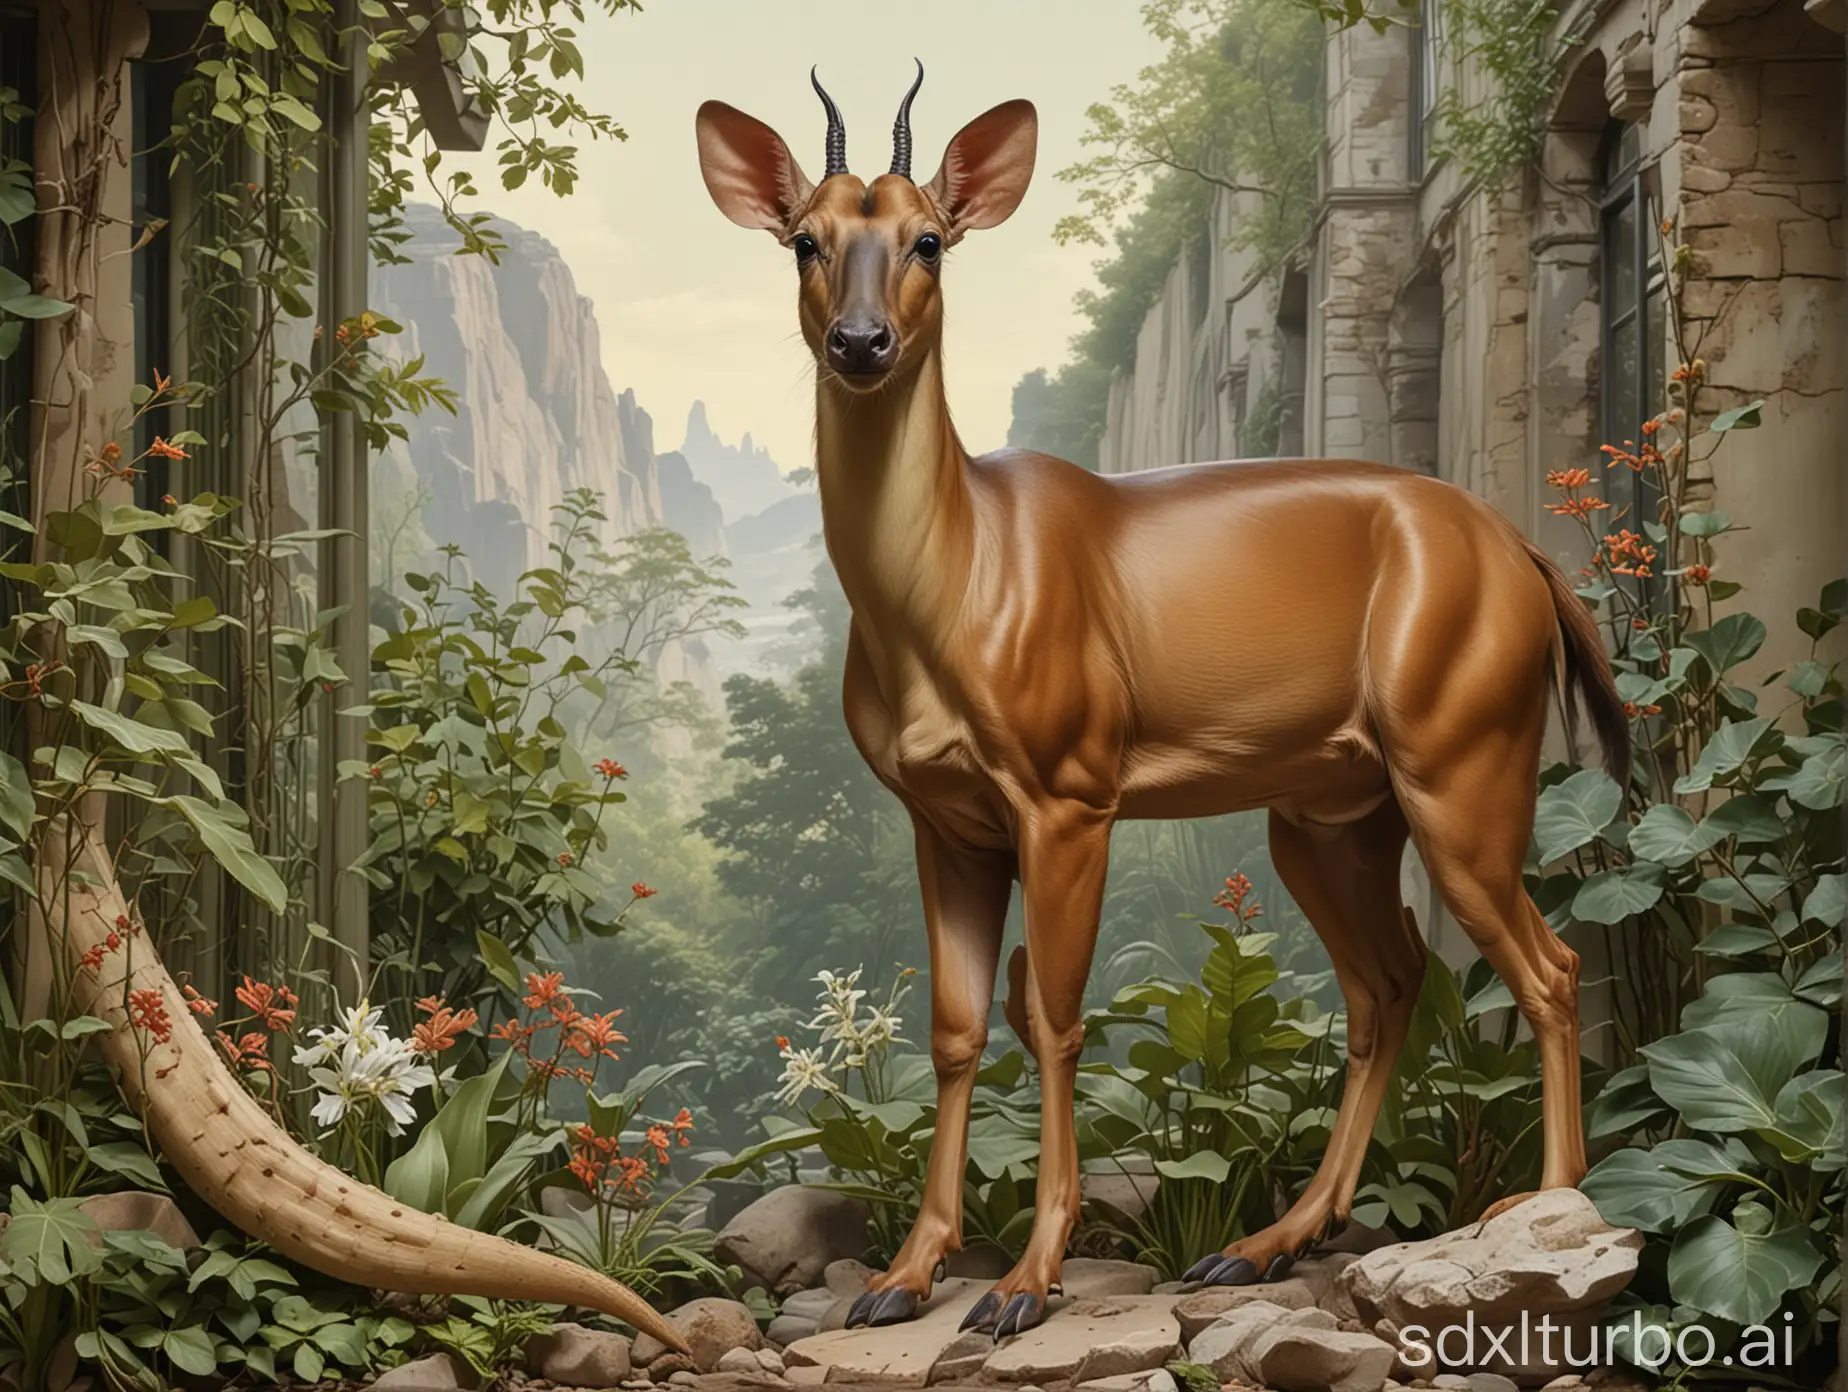 A full body shot of a hybrid creature: anatomy of a muntcak, with body skin of a lizard, with a background of a rocky glasshouse garden, in the style of painting by Leyendecker.